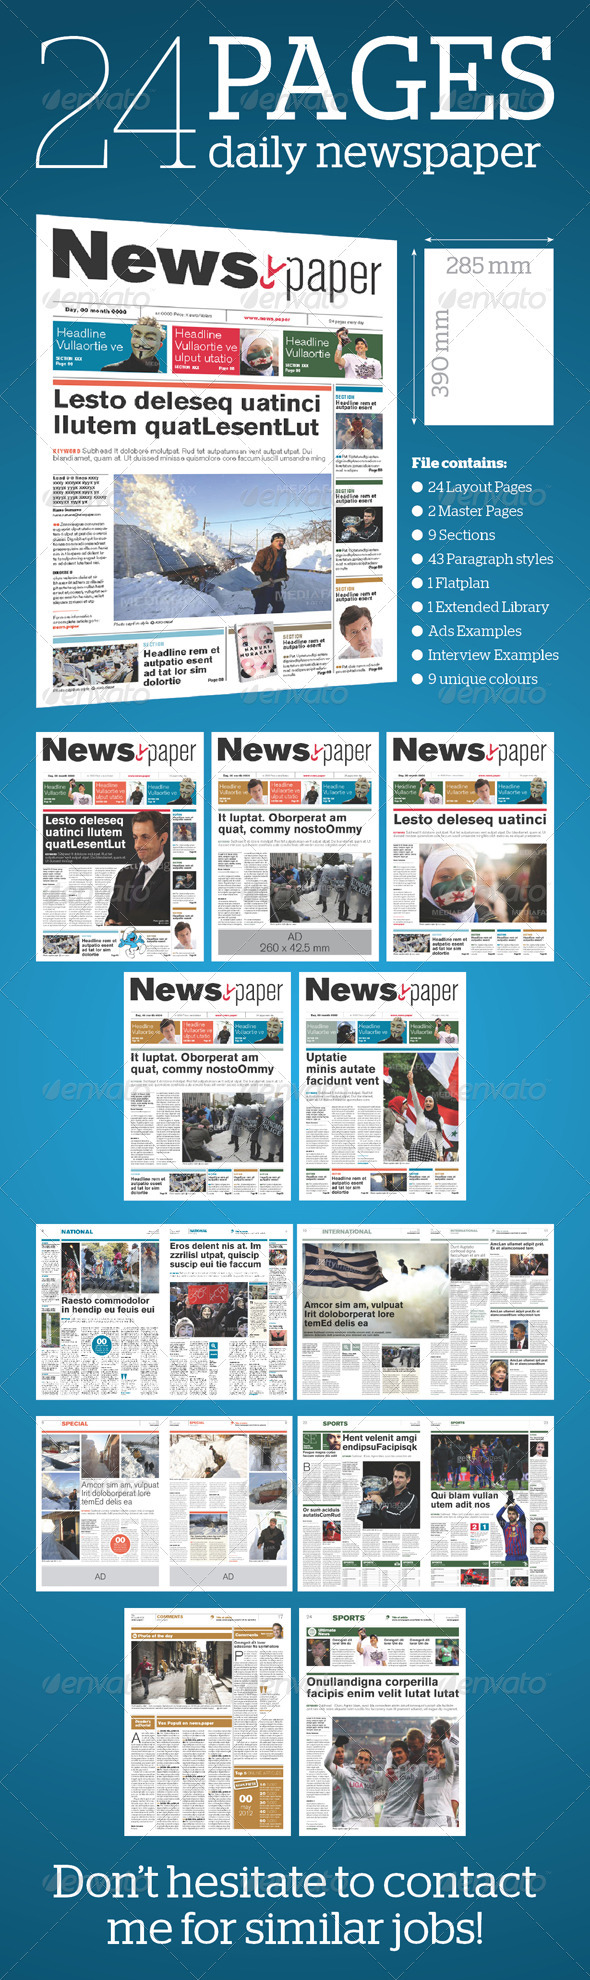 Newspaper Template Photoshop Elements